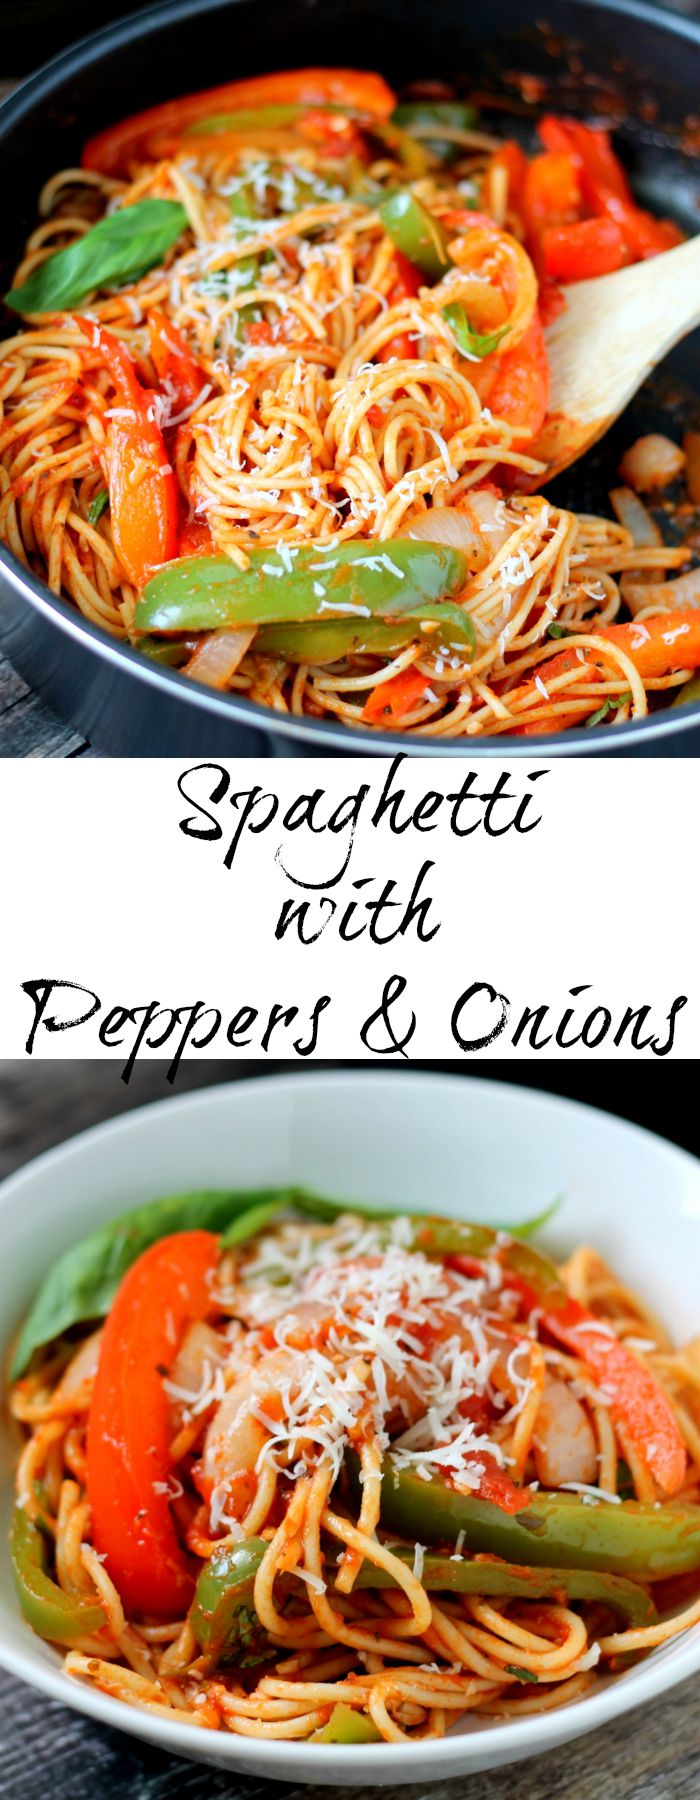 Spaghetti with Peppers and Onions